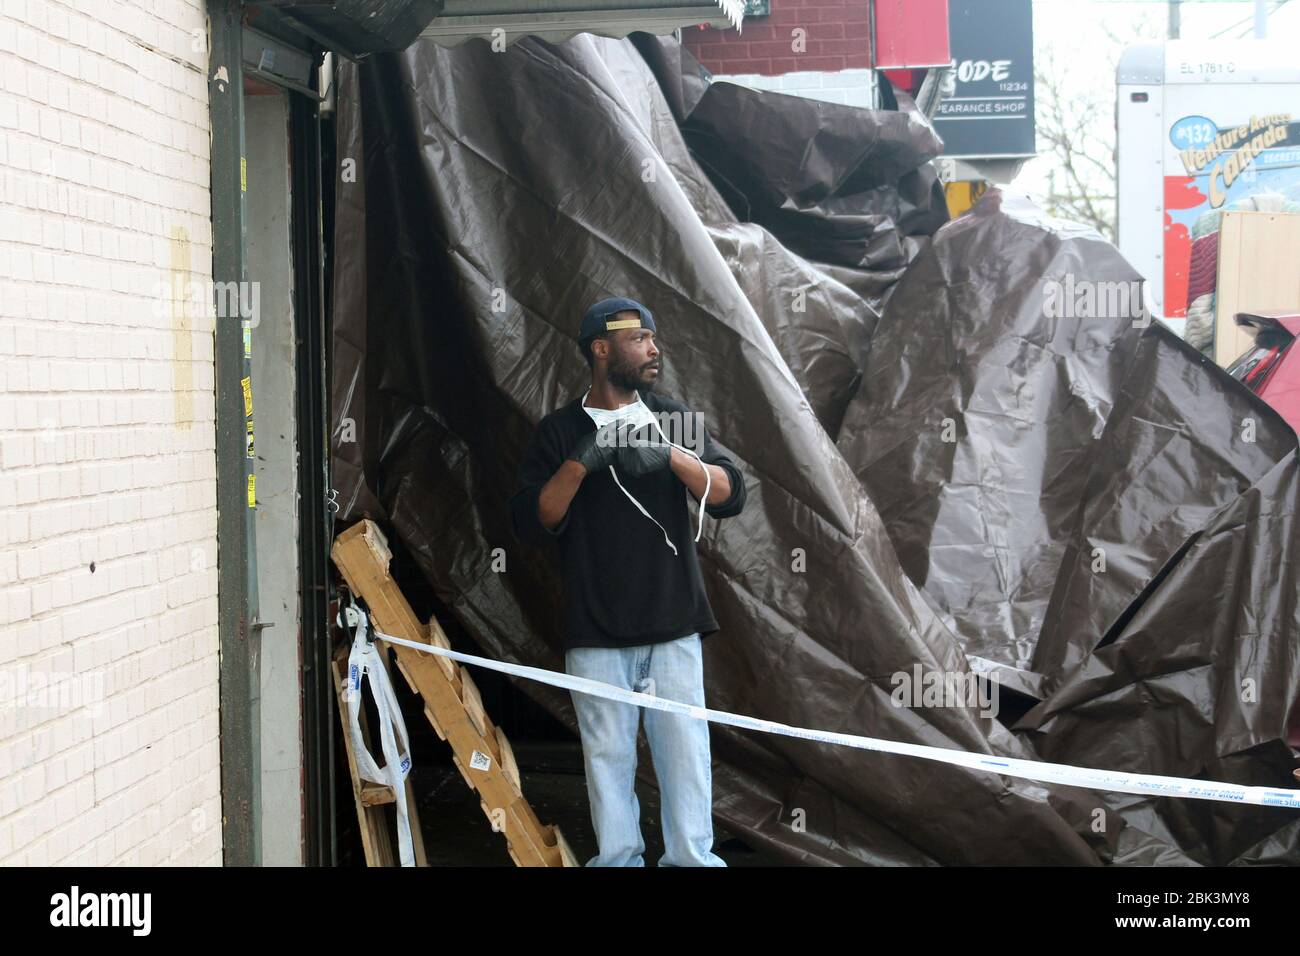 April 30, 2020, New York, New York, USA: A worker, mask face down, looks towards the street along a brown tarp set up at the entrance of the Andrew T. Cleckley Funeral Home in Brooklyn where bodies non properly cared are removed. 60 corpses were stored in 4 non-refregerated vehiciles lining the street nearby stores. Neighbors reported a foul smell still persistent and fluids dripping from the trucks. The funeral home was overwhelmed by COVID-19 deaths, waiting for weeks for cremations in New York. (Credit Image: © Marie Le Ble/ZUMA Wire) Stock Photo